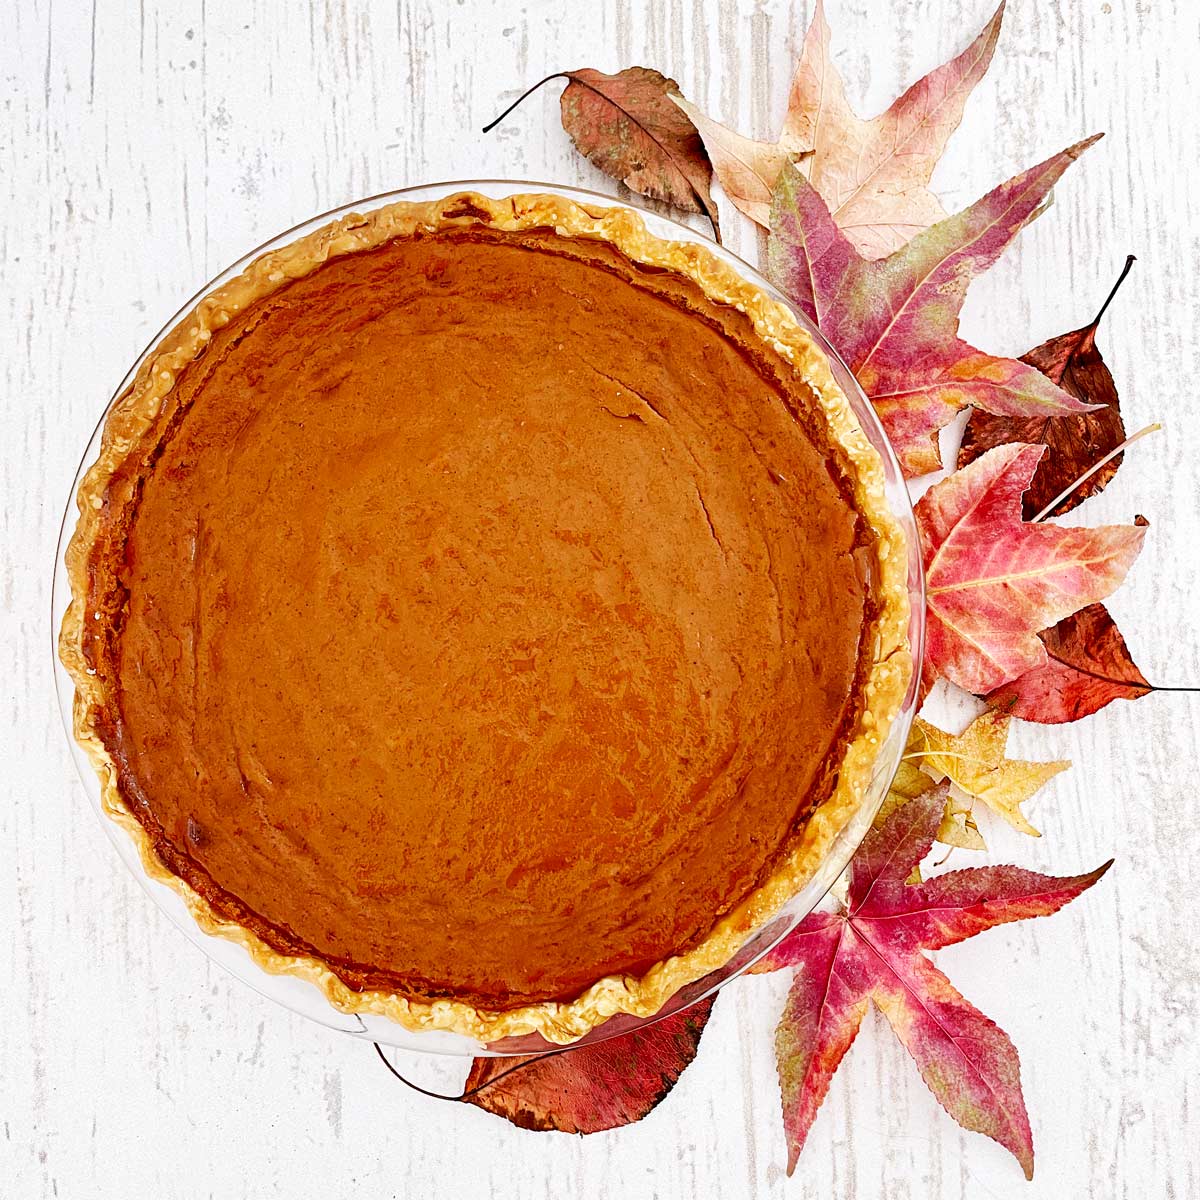 Baked sweet potato pie with Fall leaves.